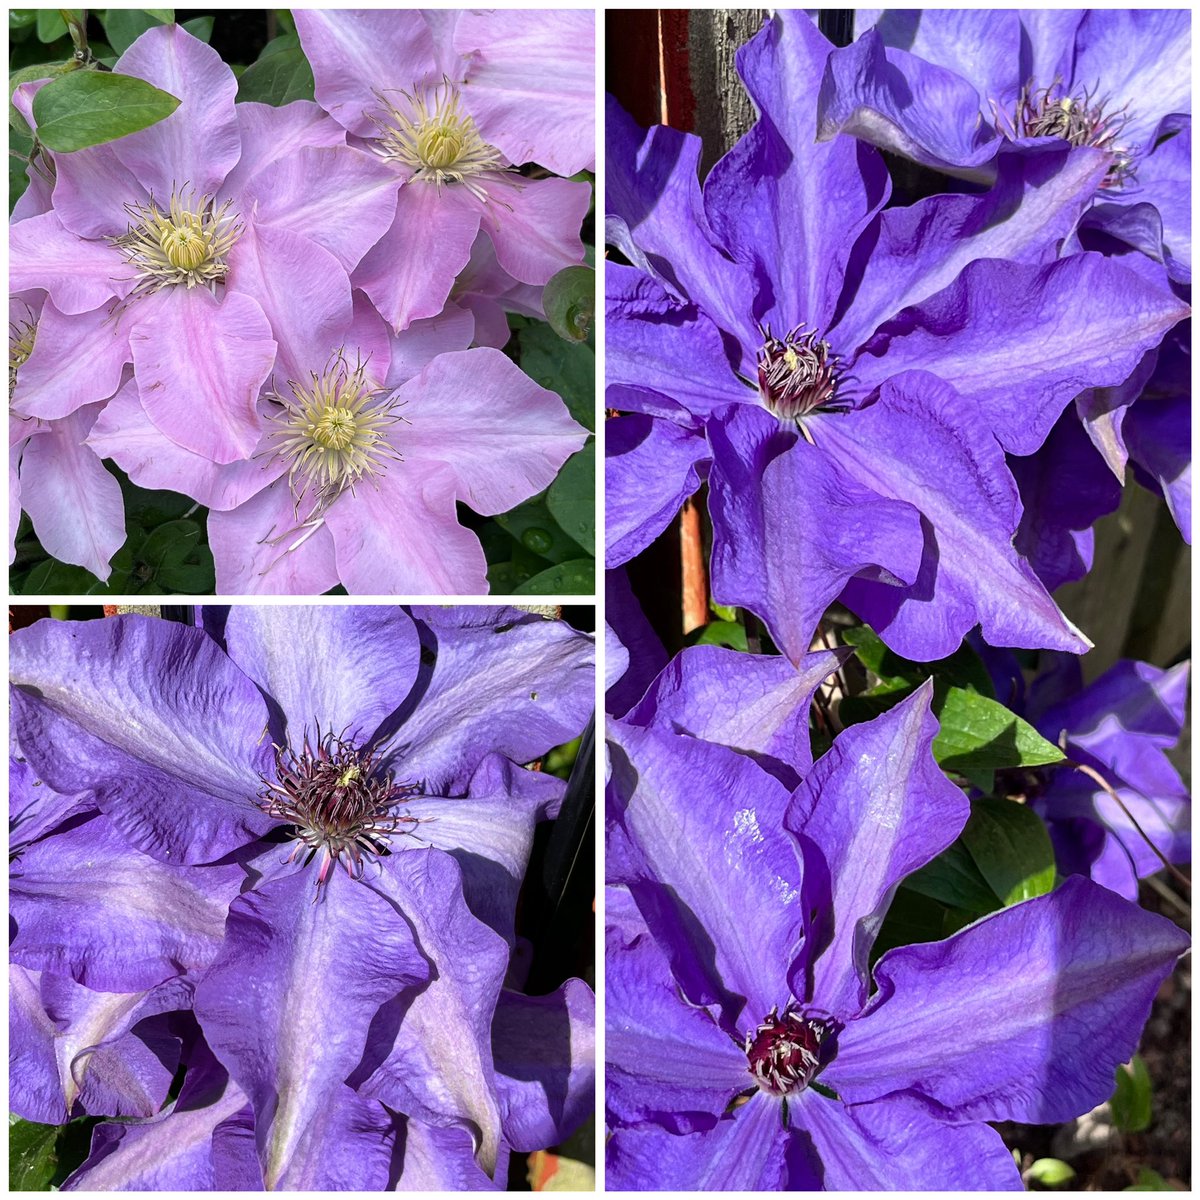 Clematis flowers bringing colours and happiness into the garden. #MyGarden #ClematisThursday Happy Thursday.